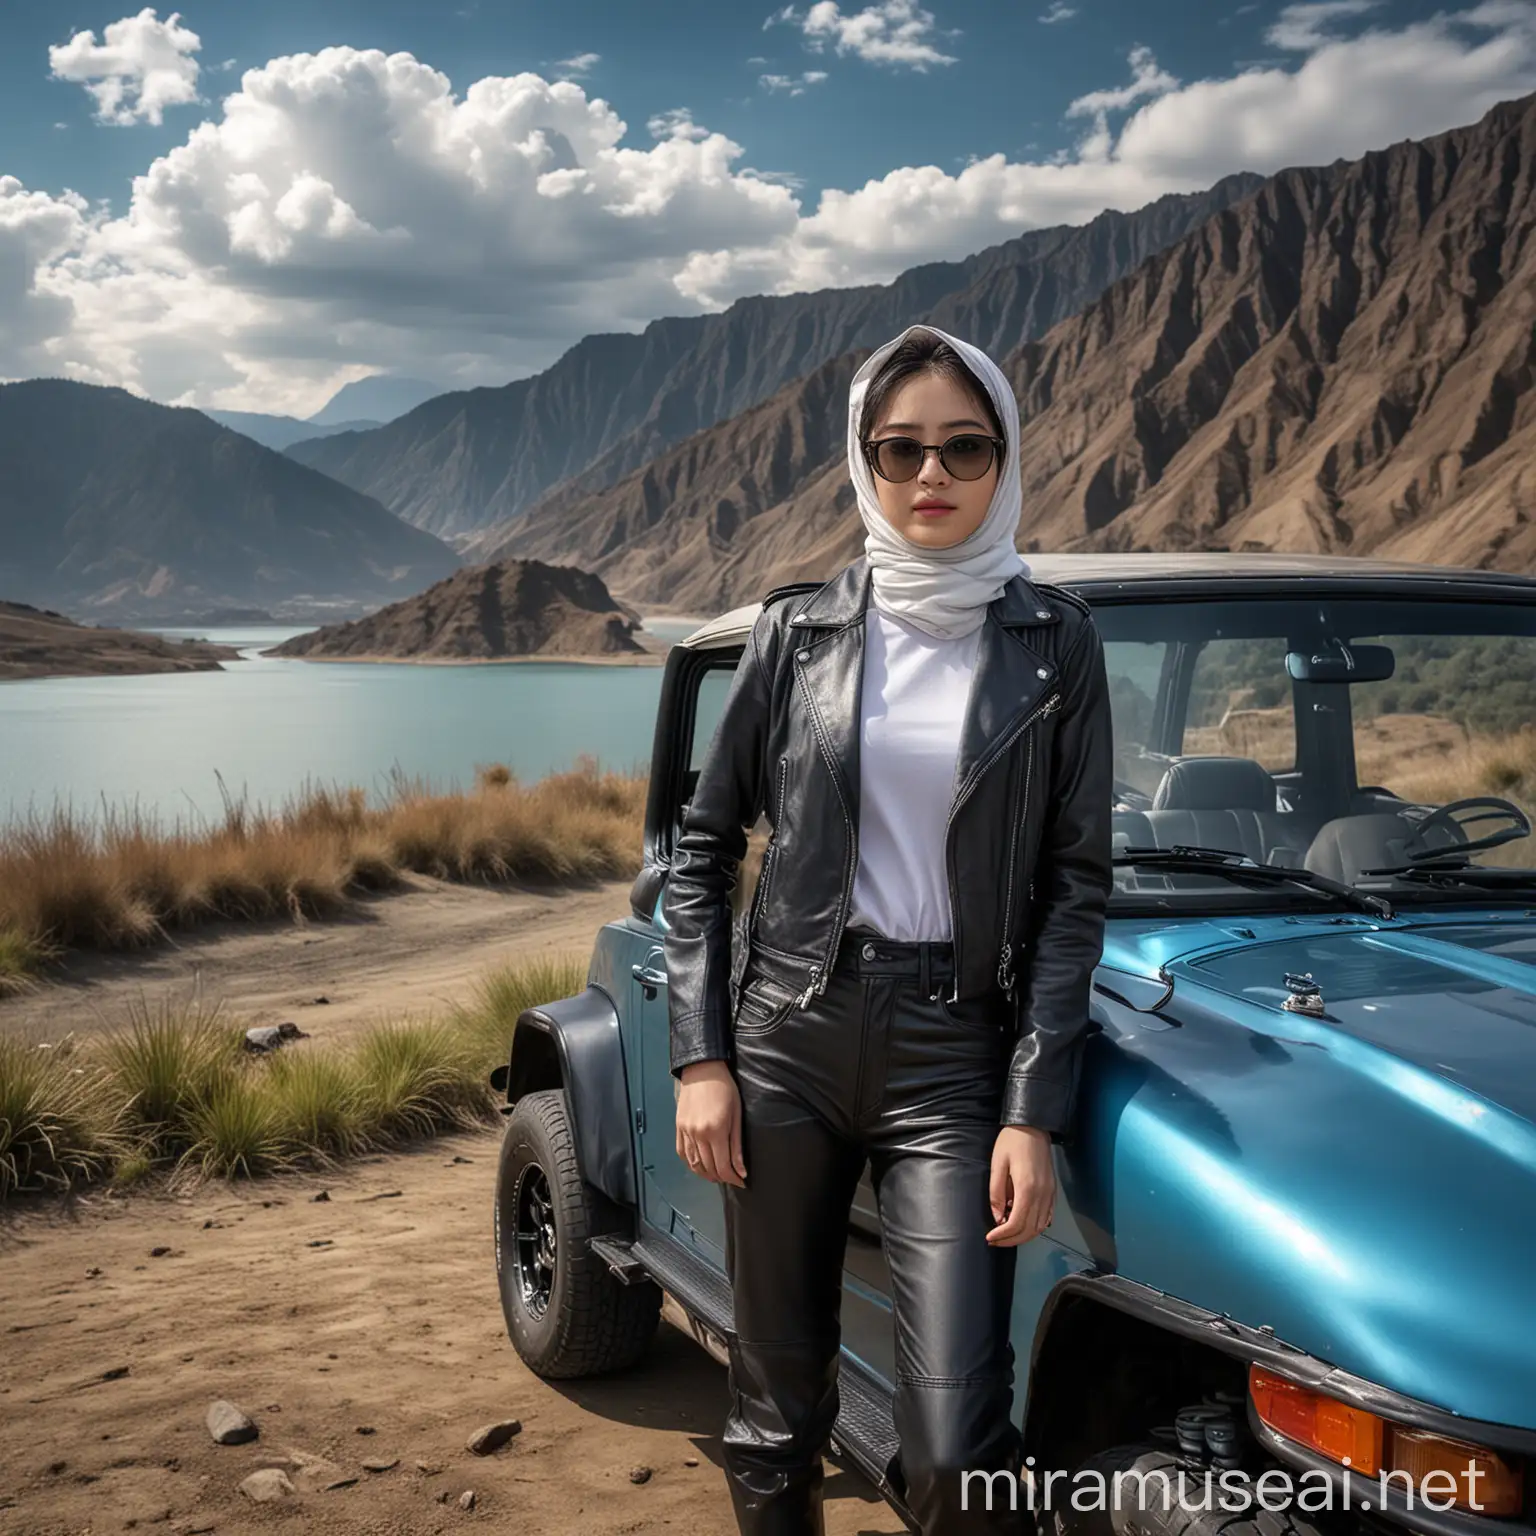 Korean Woman in Hijab Poses by Rubicon Car with Bromo Mountain Backdrop